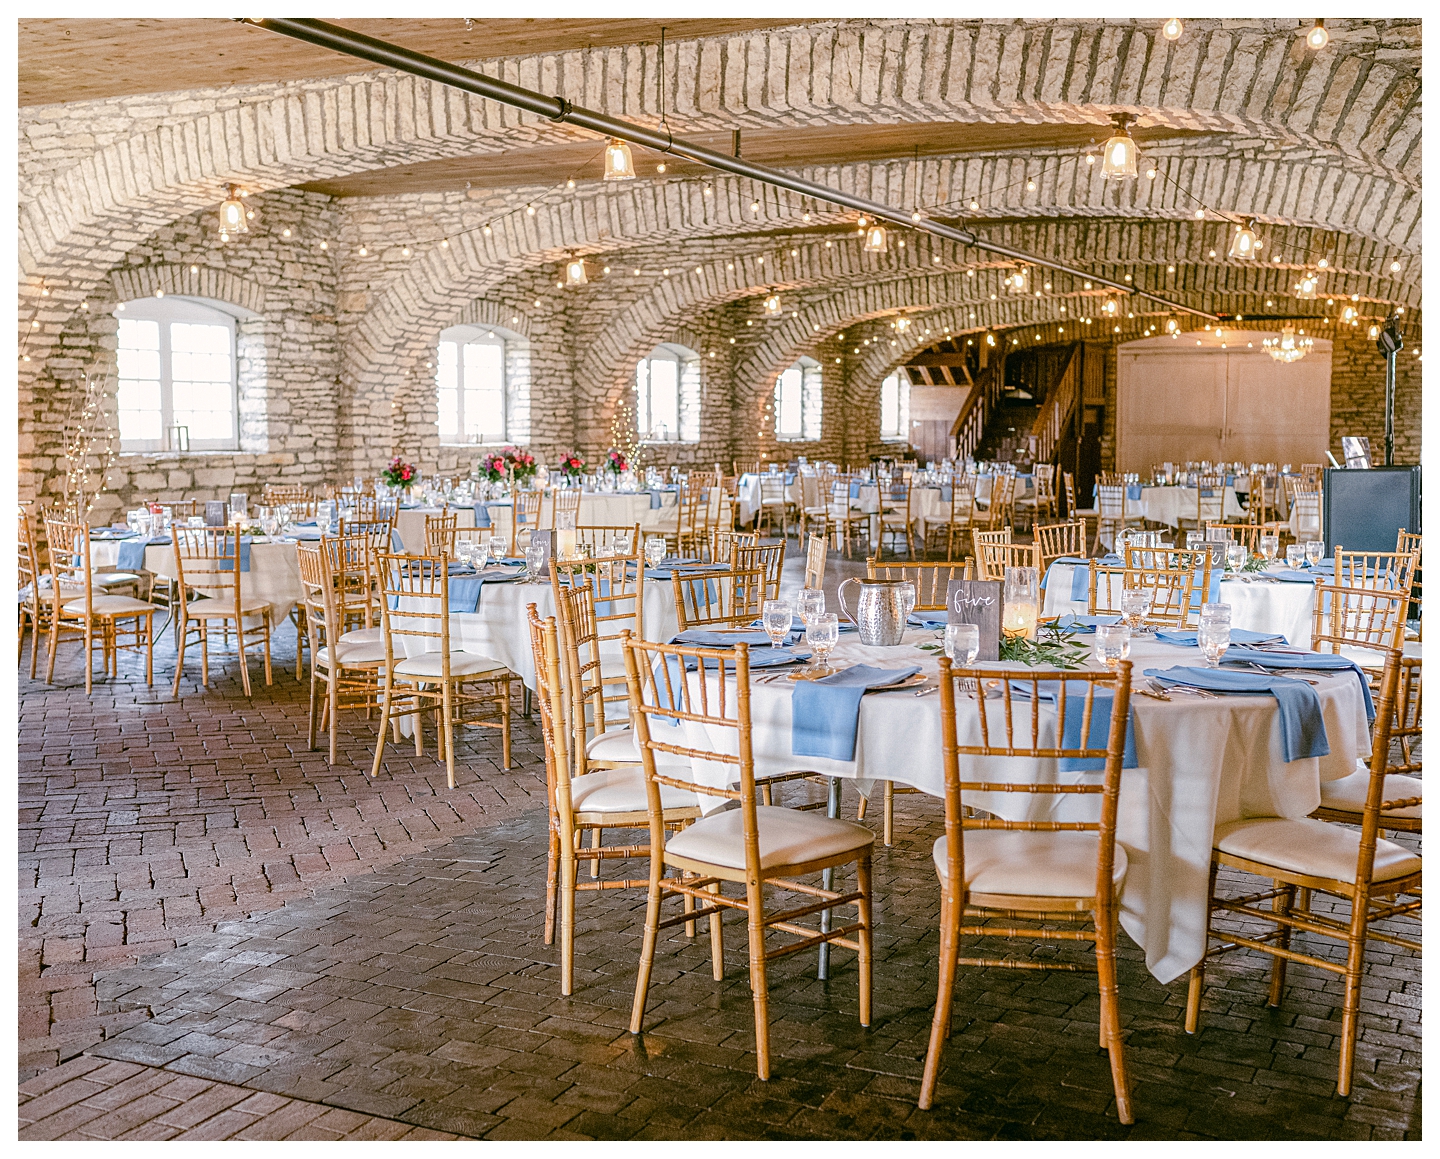 The decorated reception space a Mayowood Stone Barn Wedding. Photo by Kayla Lee.